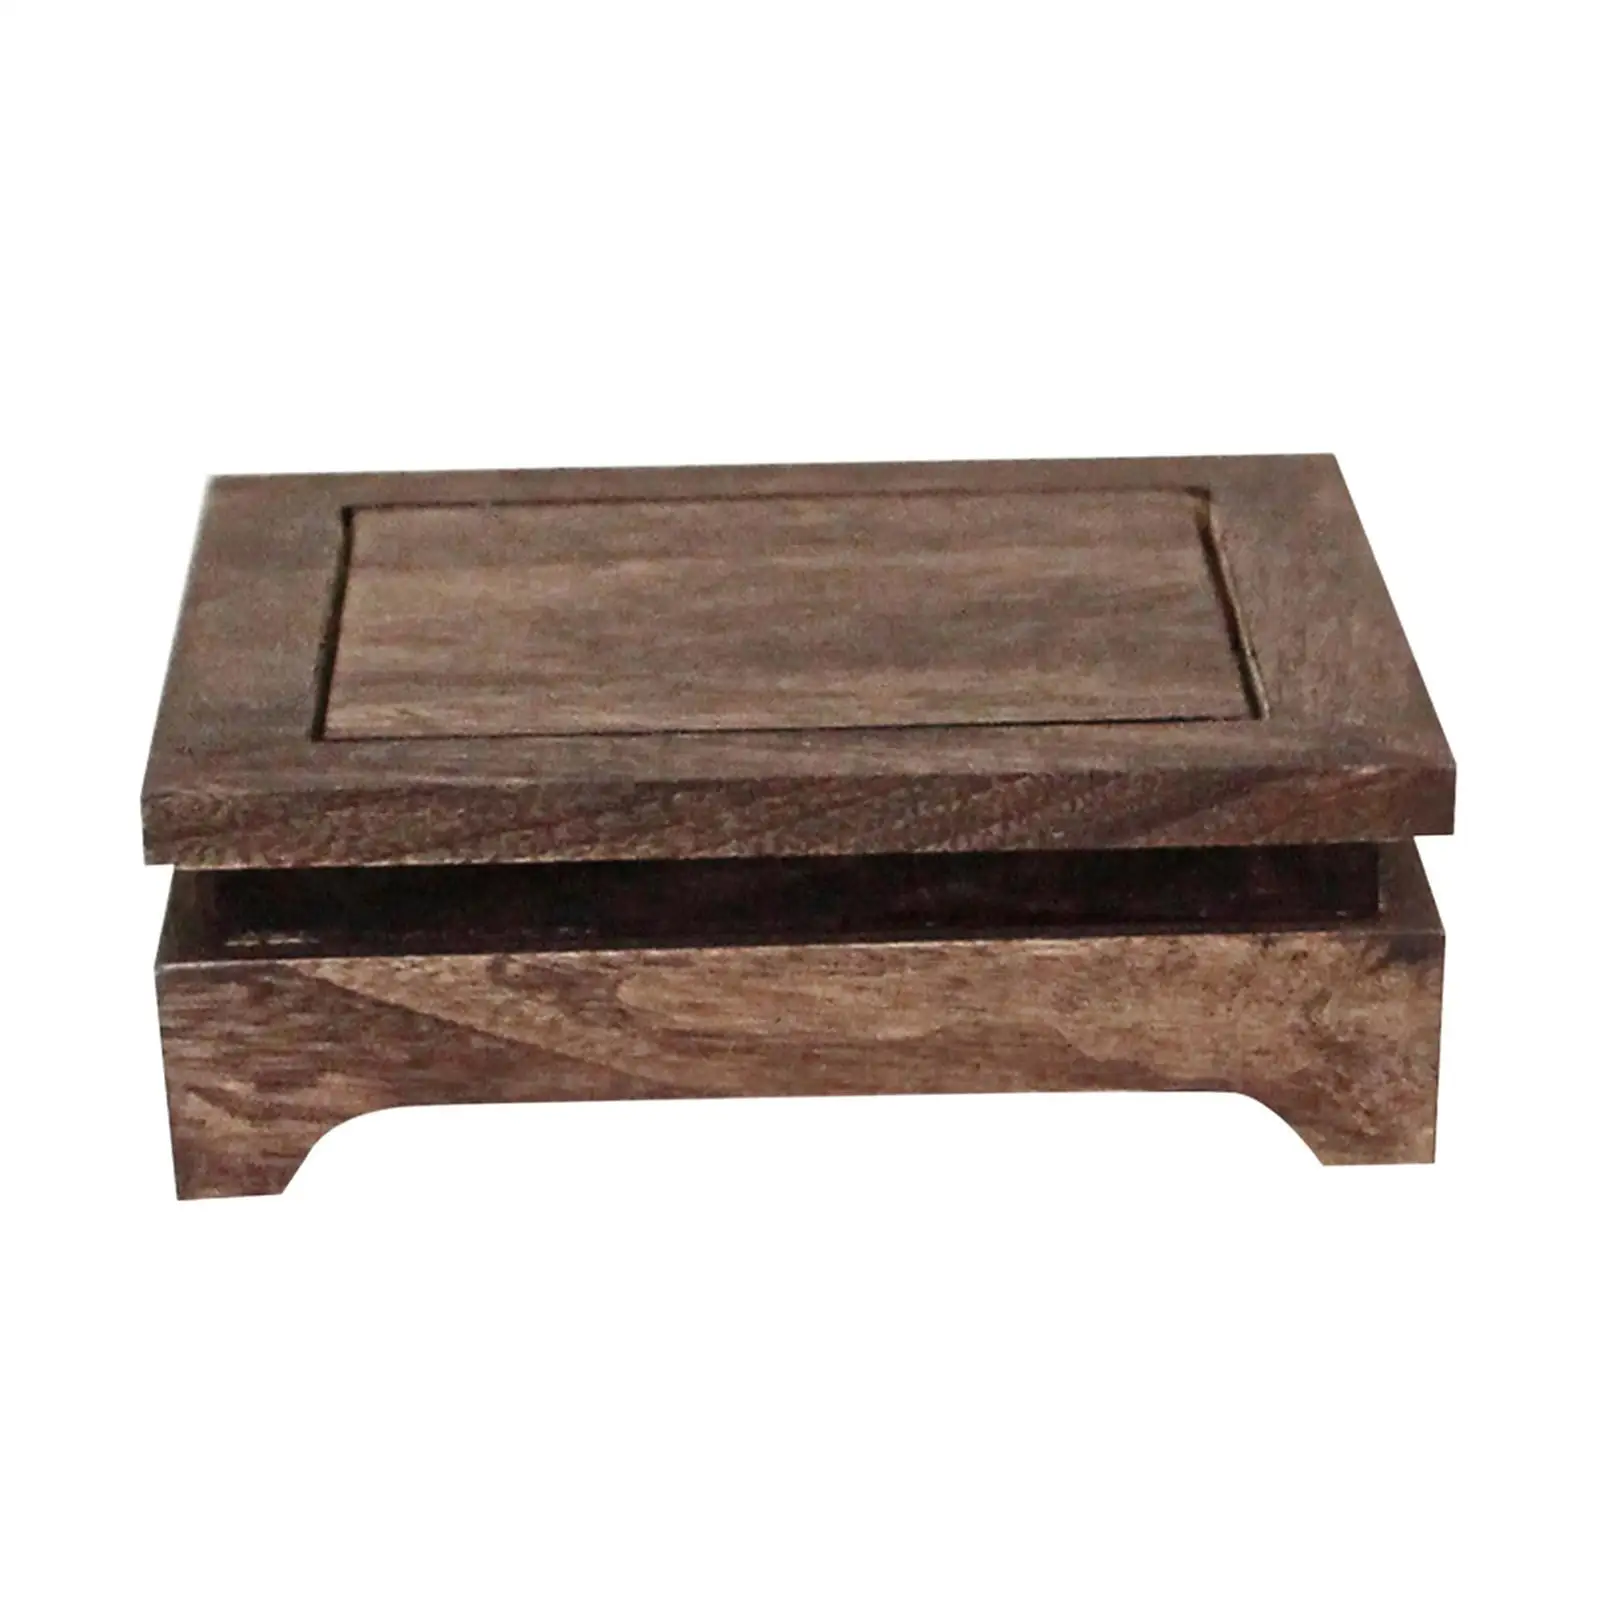 Wooden Display Stand Stone Rectangular Base for Collectibles Decorative Base